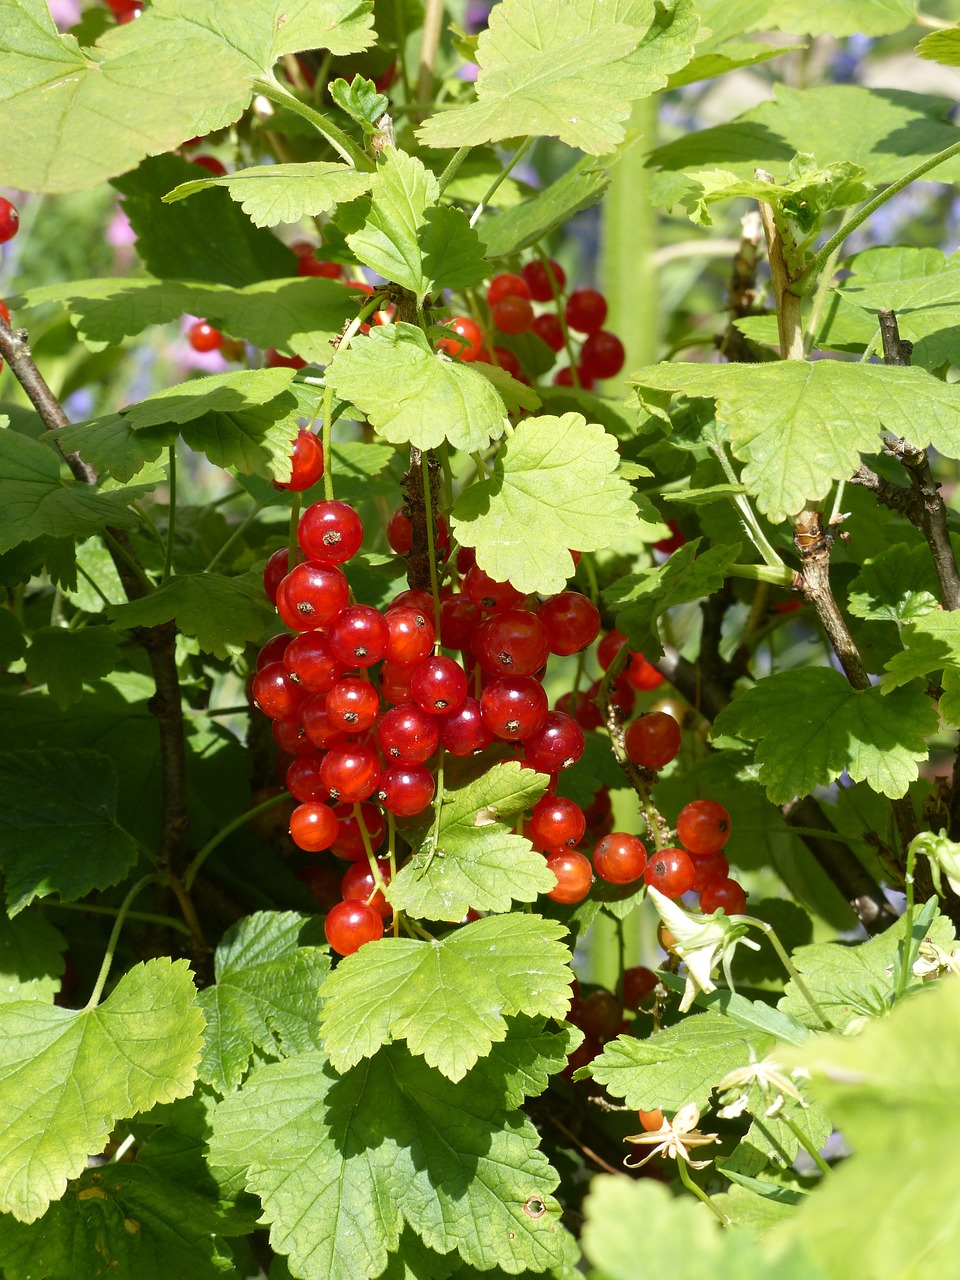 a bush filled with lots of red berries, shutterstock, bauhaus, nordic summer, an ancient, stock photo, 4:3